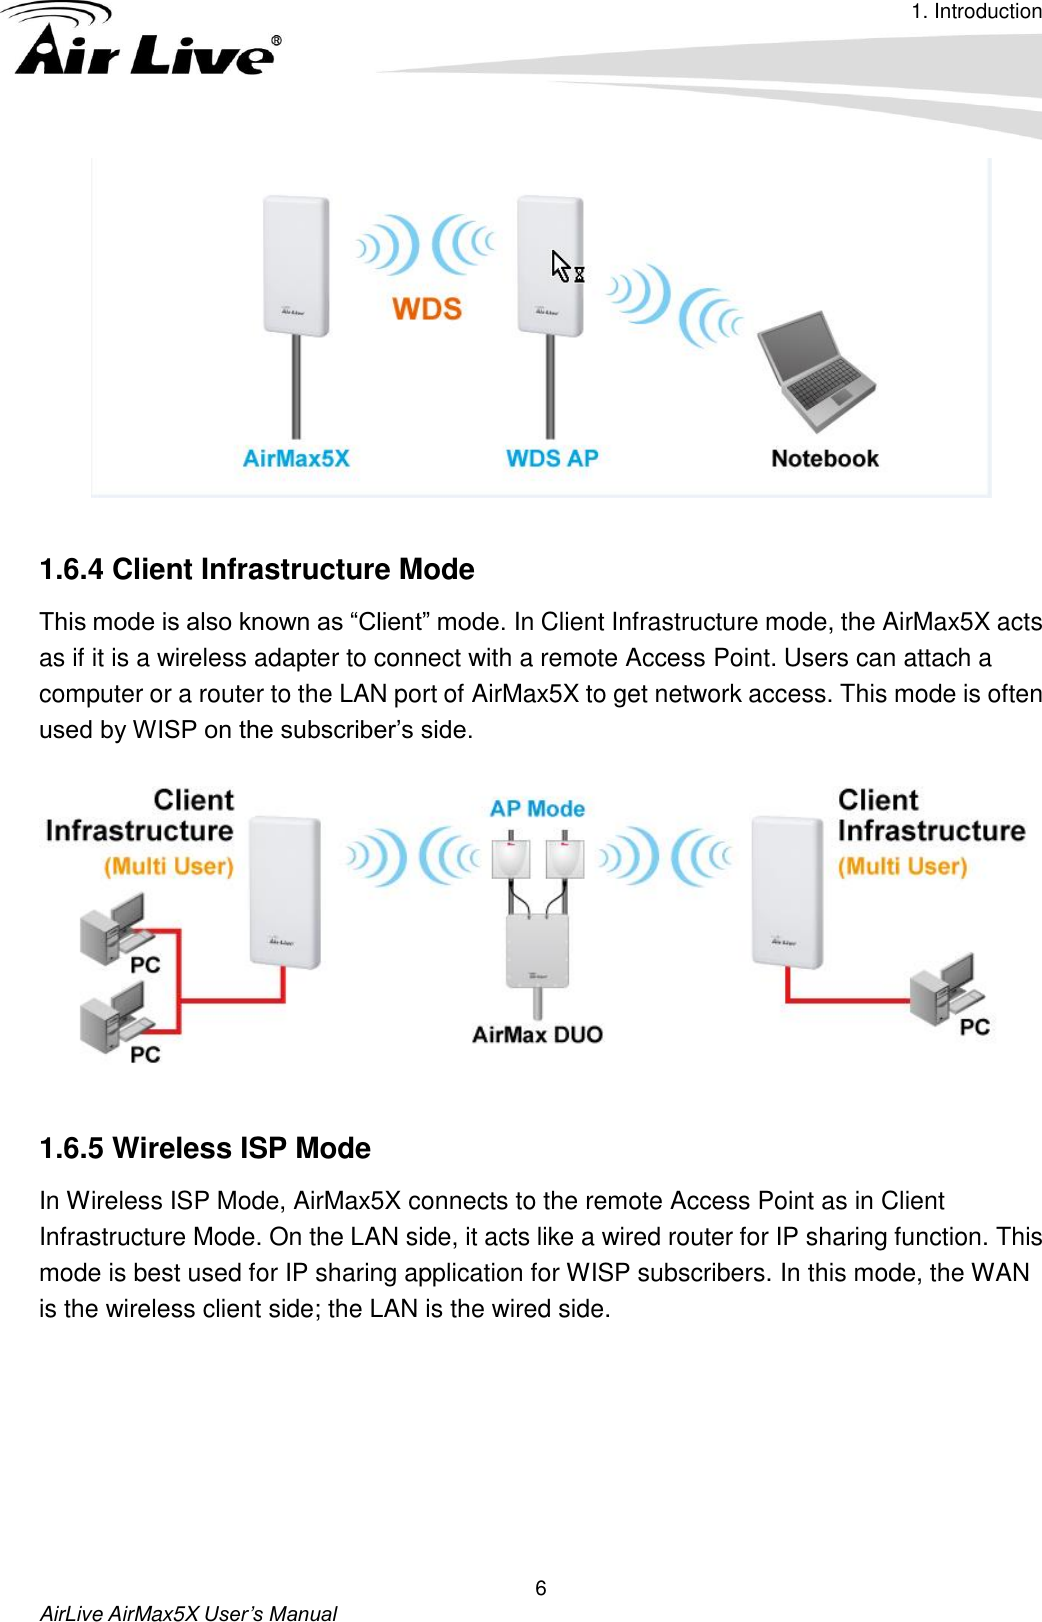 1. Introduction    AirLive AirMax5X User’s Manual 6   1.6.4 Client Infrastructure Mode This mode is also known as “Client” mode. In Client Infrastructure mode, the AirMax5X acts as if it is a wireless adapter to connect with a remote Access Point. Users can attach a computer or a router to the LAN port of AirMax5X to get network access. This mode is often used by WISP on the subscriber’s side.     1.6.5 Wireless ISP Mode In Wireless ISP Mode, AirMax5X connects to the remote Access Point as in Client Infrastructure Mode. On the LAN side, it acts like a wired router for IP sharing function. This mode is best used for IP sharing application for WISP subscribers. In this mode, the WAN is the wireless client side; the LAN is the wired side. 